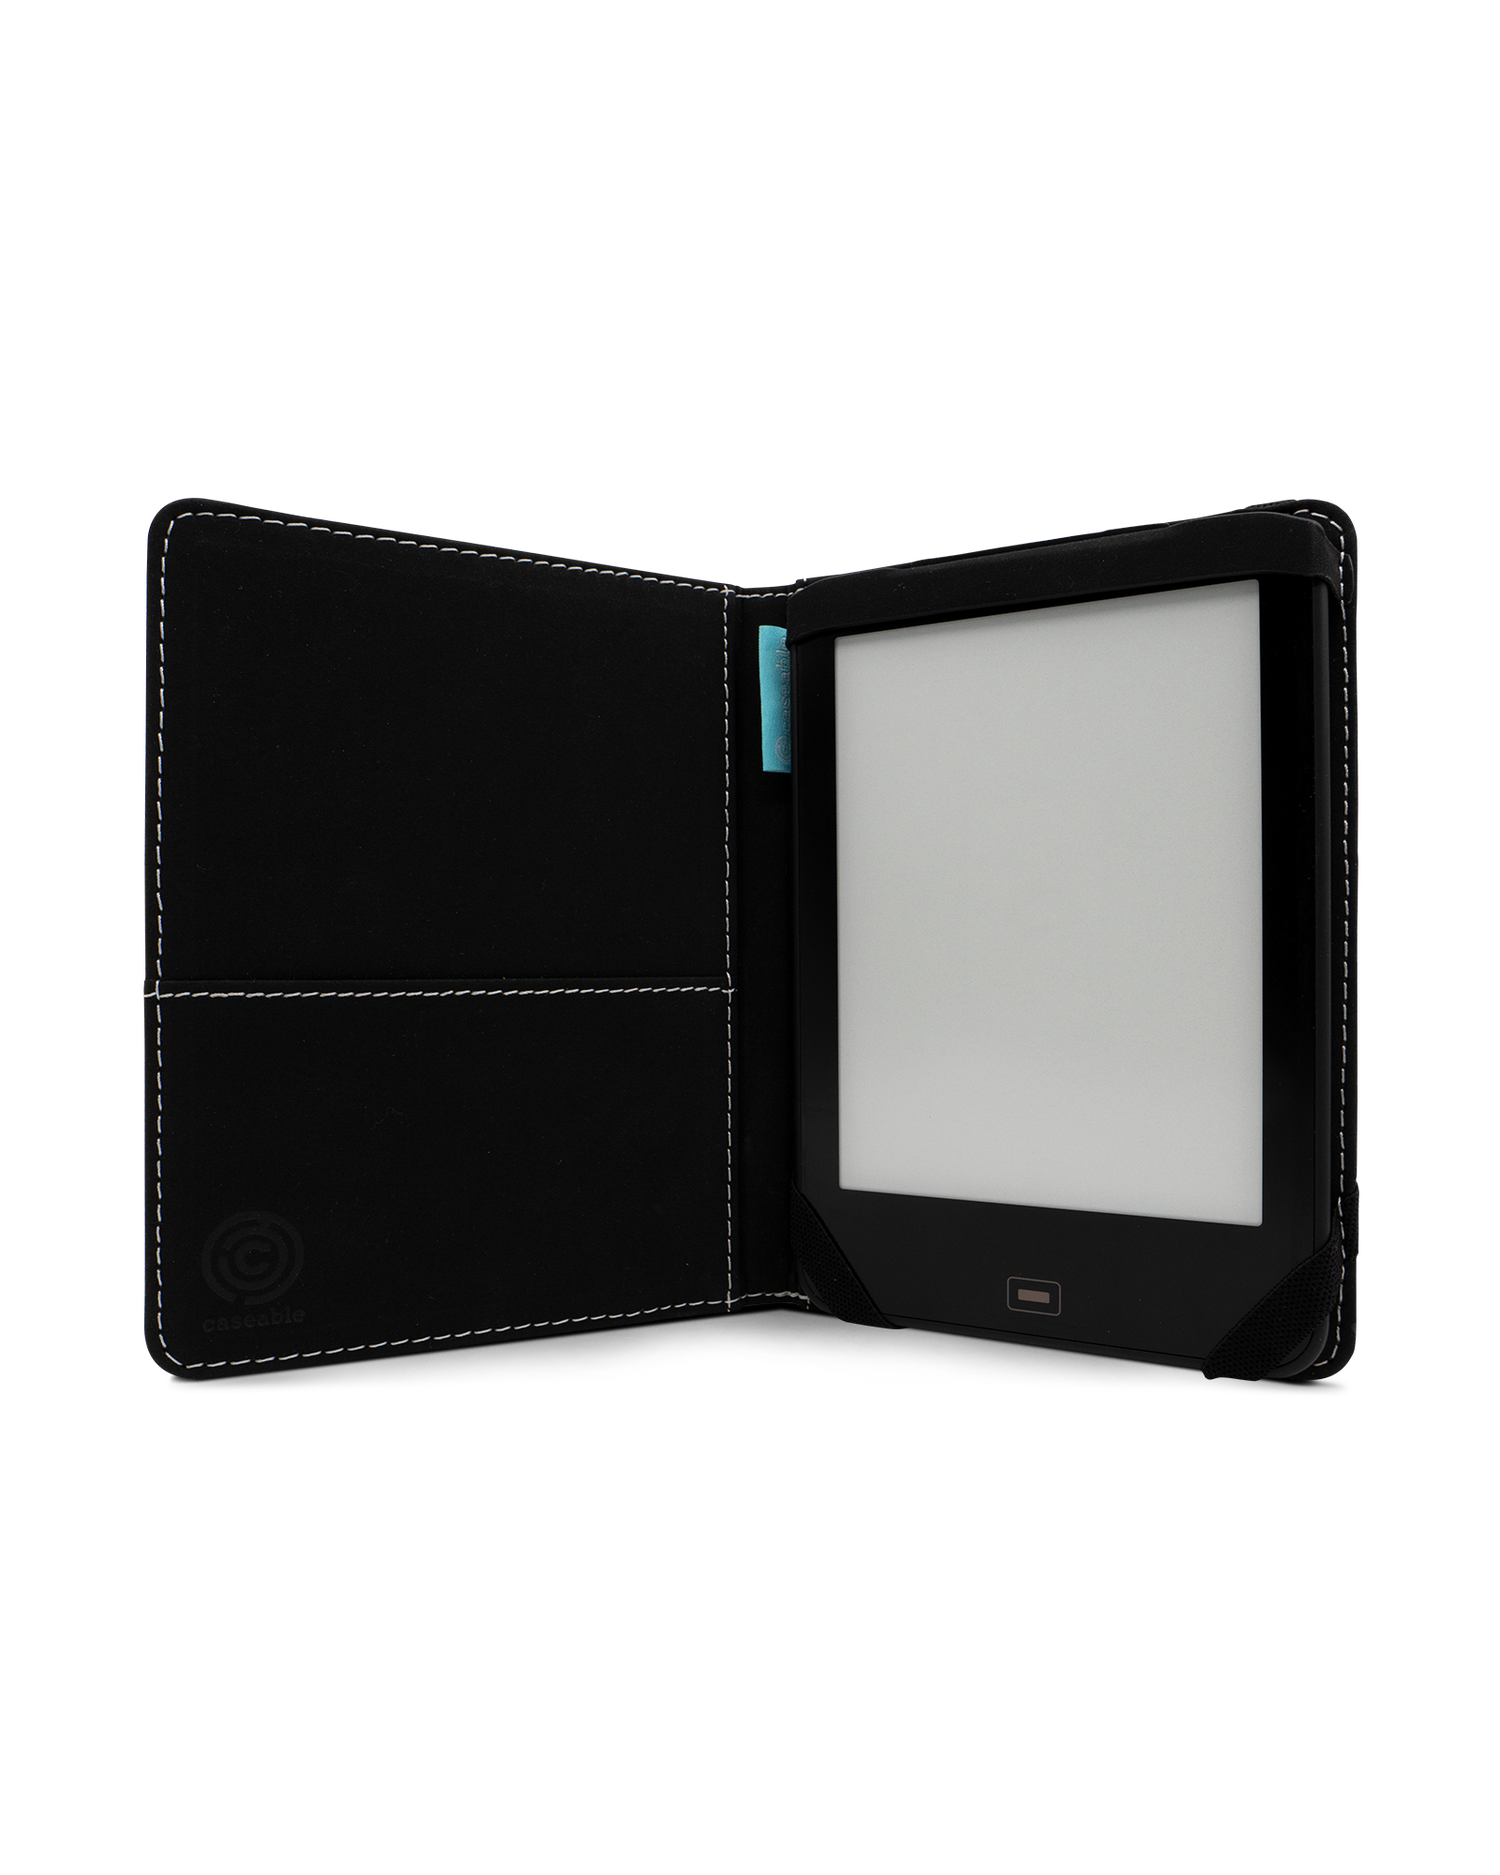 Electric Ocean 2 eReader Case for tolino vision 1 to 4 HD: Opened interior view